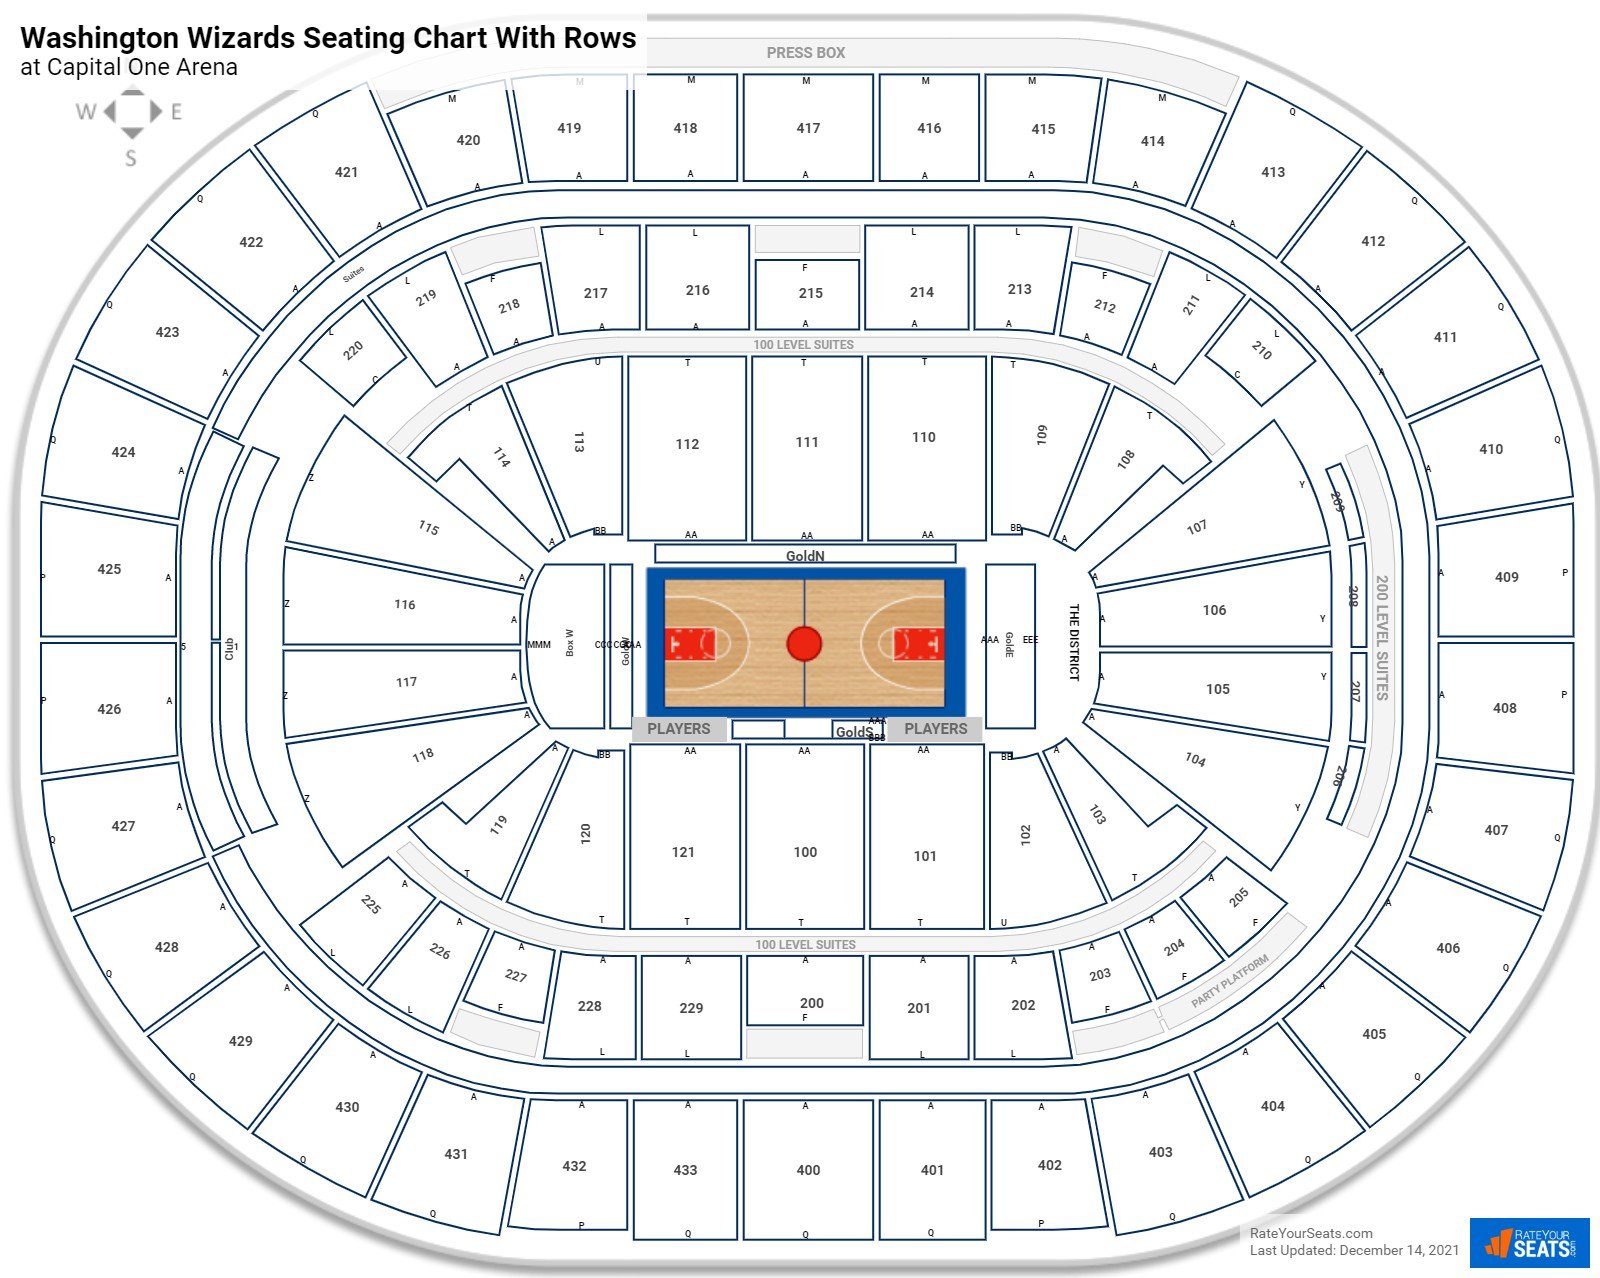 Capital One Arena Seating Charts - RateYourSeats.com